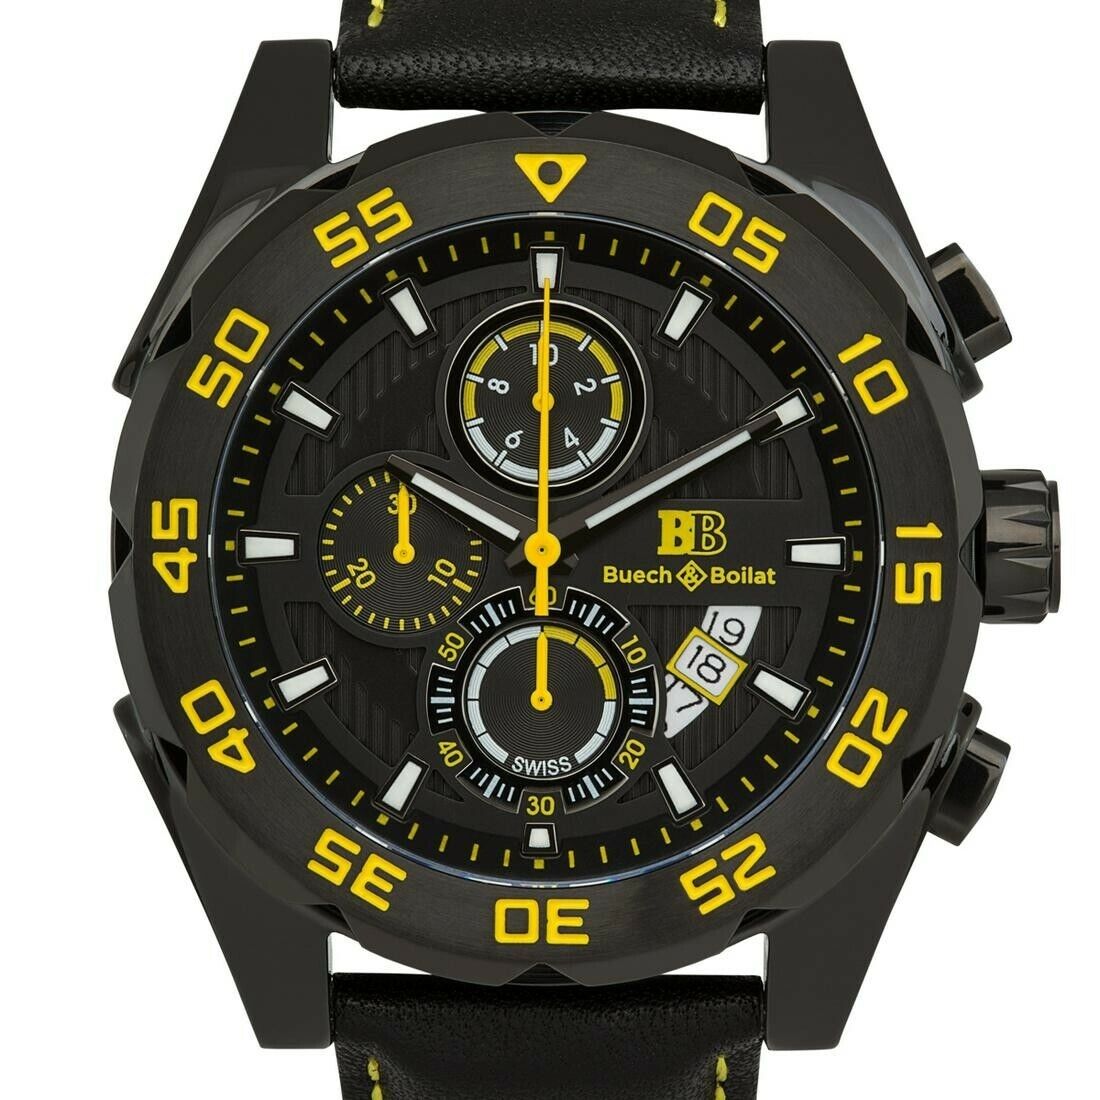 Buech & Boilat Torrent Men’s Swiss Made Chronograph Watch Black and Yellow Dial.